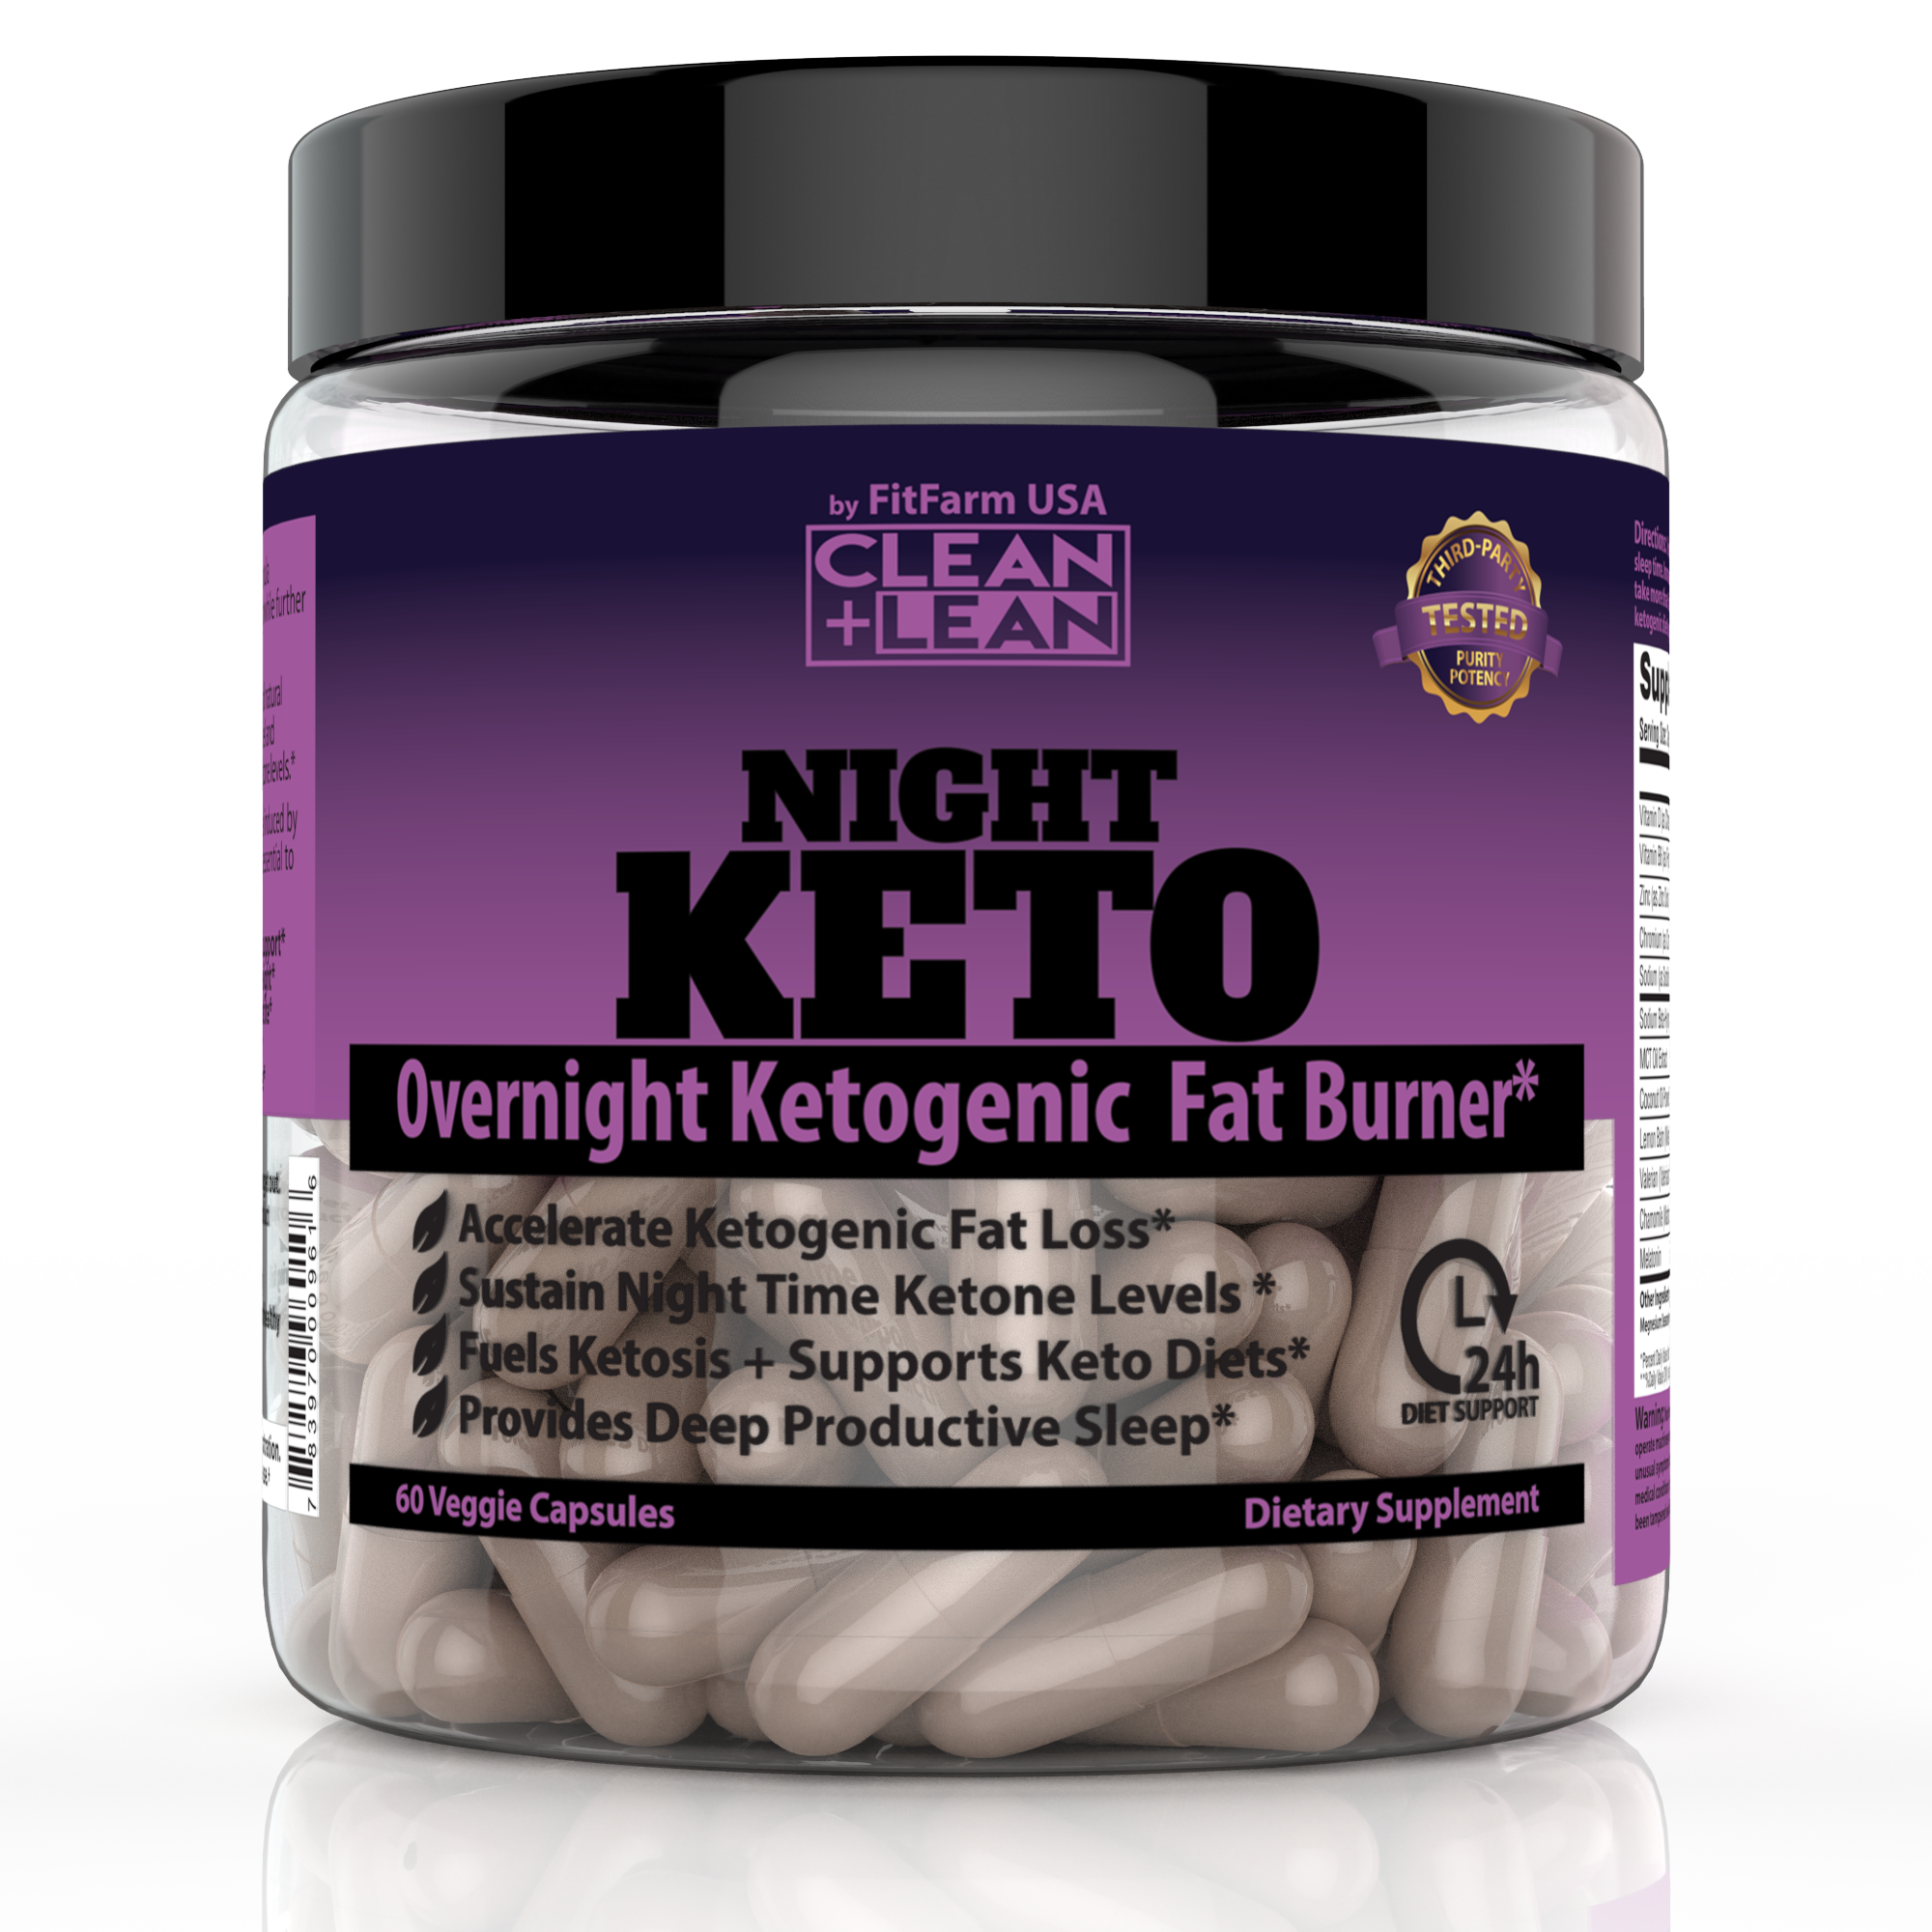 Clean + Lean Night Keto: First Ever Overnight Ketogenic Fat Burner & Sleep Aid | Bhb Ketones + Mct Oil Extract + Vitamins & Minerals | 24 Hr Diet Sleep Great Lose Weight | All Natural & GF | 60 Caps